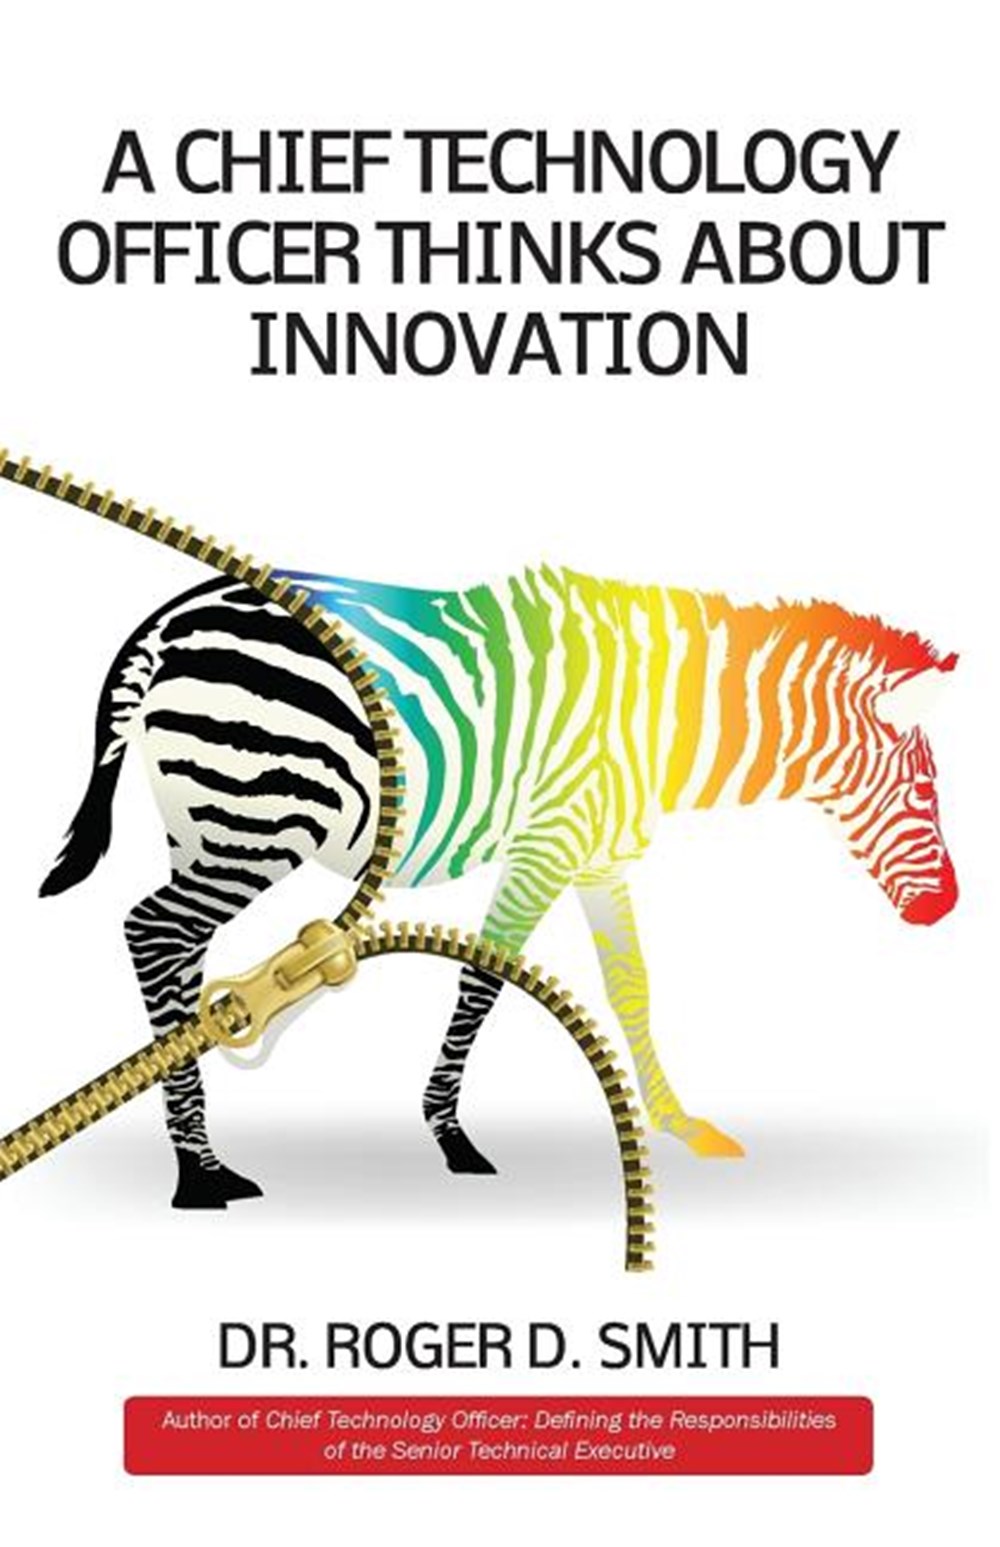 Chief Technology Officer Thinks About Innovation